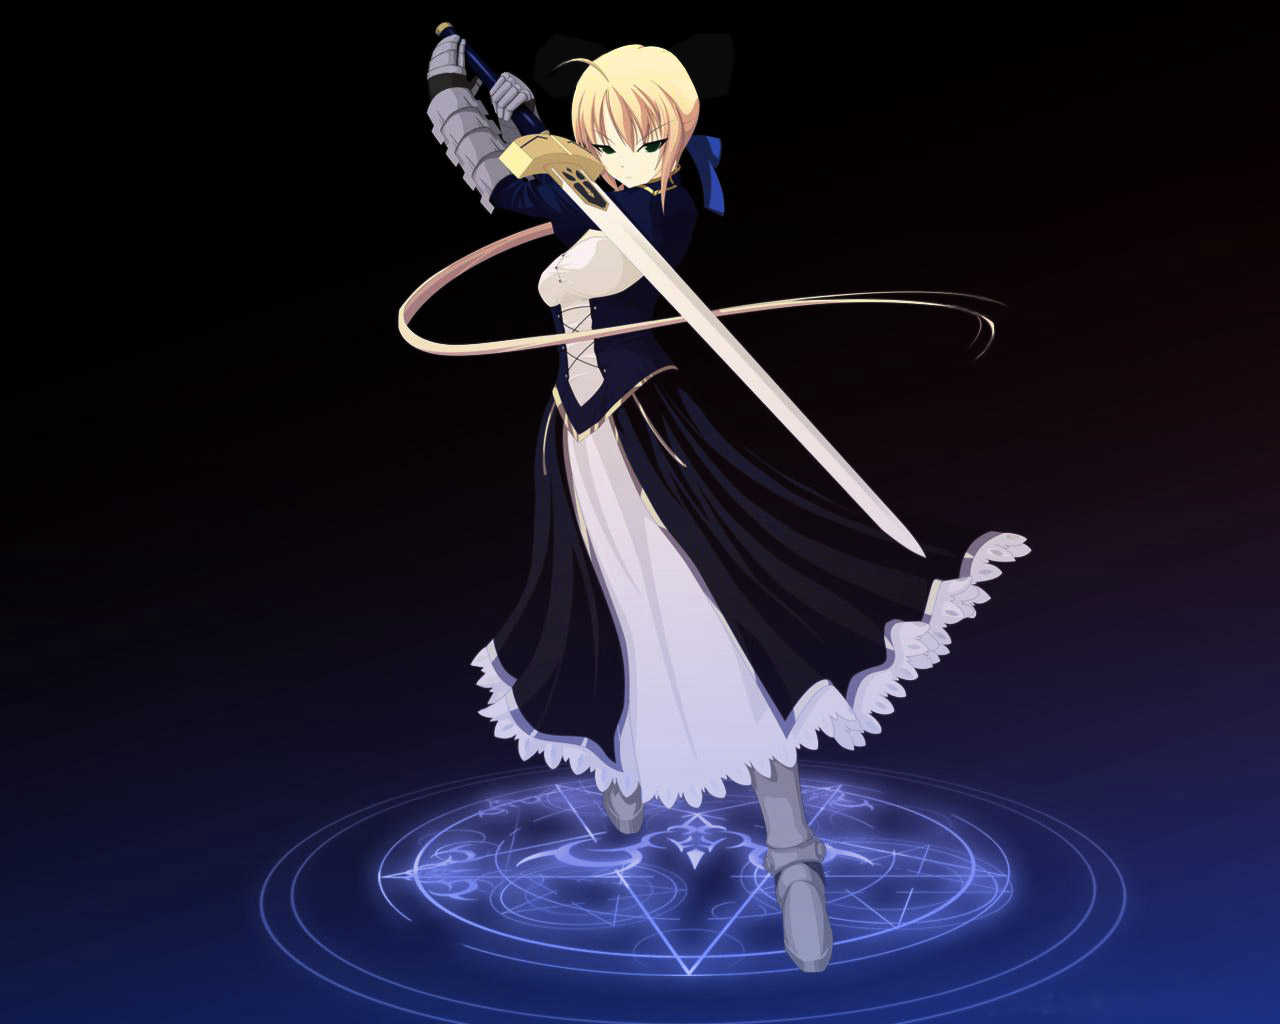 Saber Fate Stay Night Fate Stay Night フェイト ステイナイト 壁紙 ファンポップ